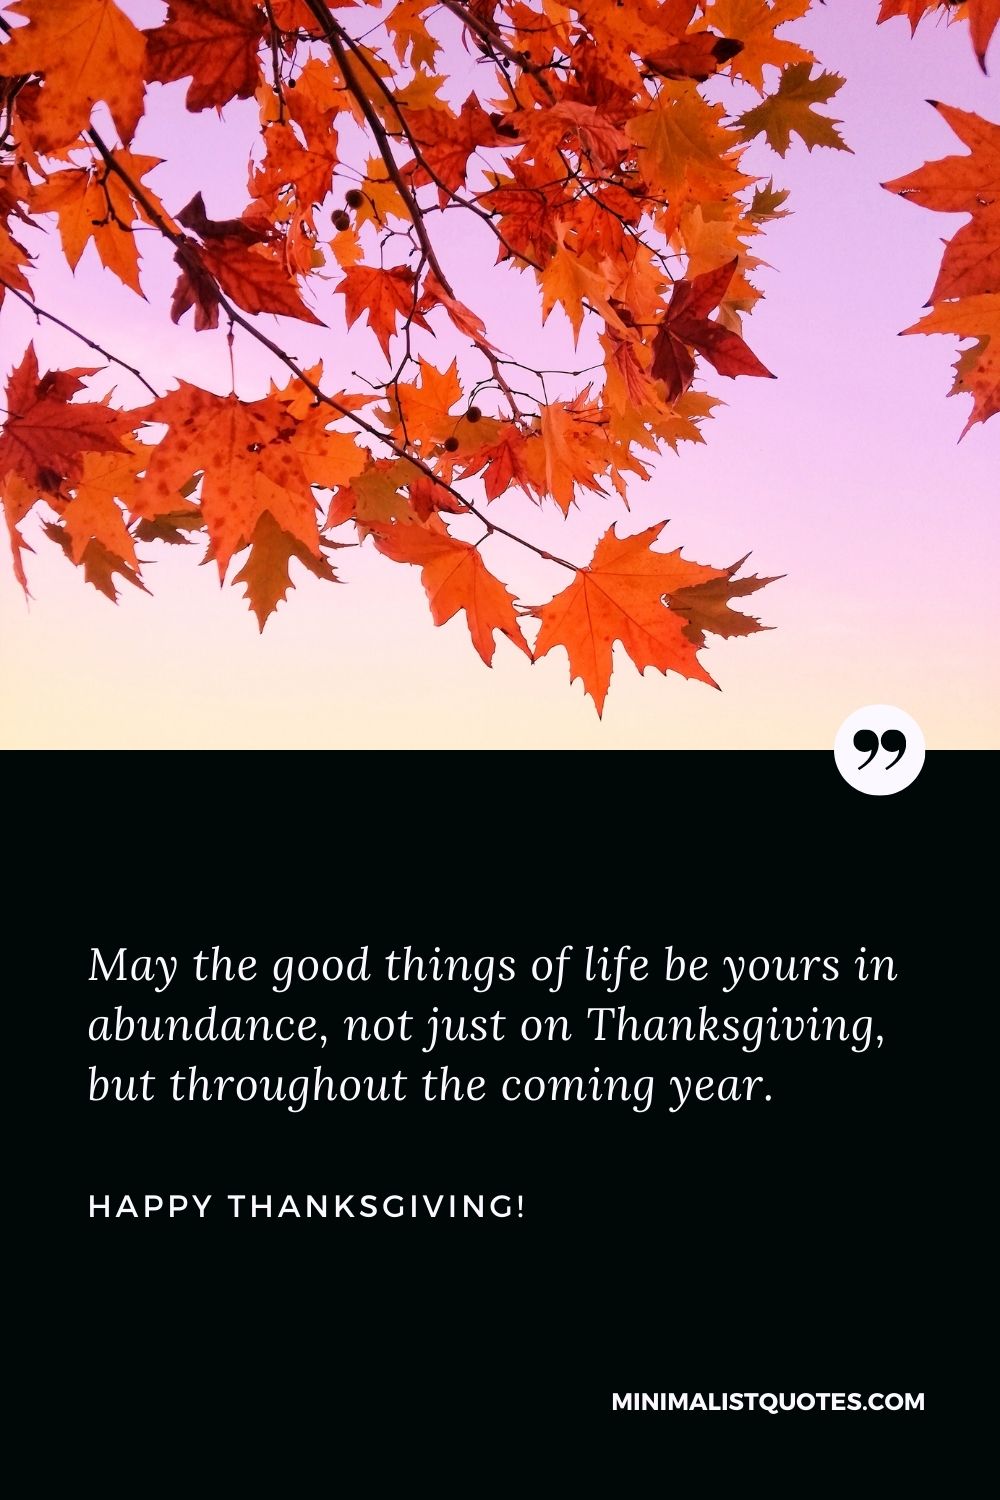 Happy thanksgiving quotes for friends: May the good things of life be yours in abundance, not just on Thanksgiving, but throughout the coming year. Happy Thanksgiving!